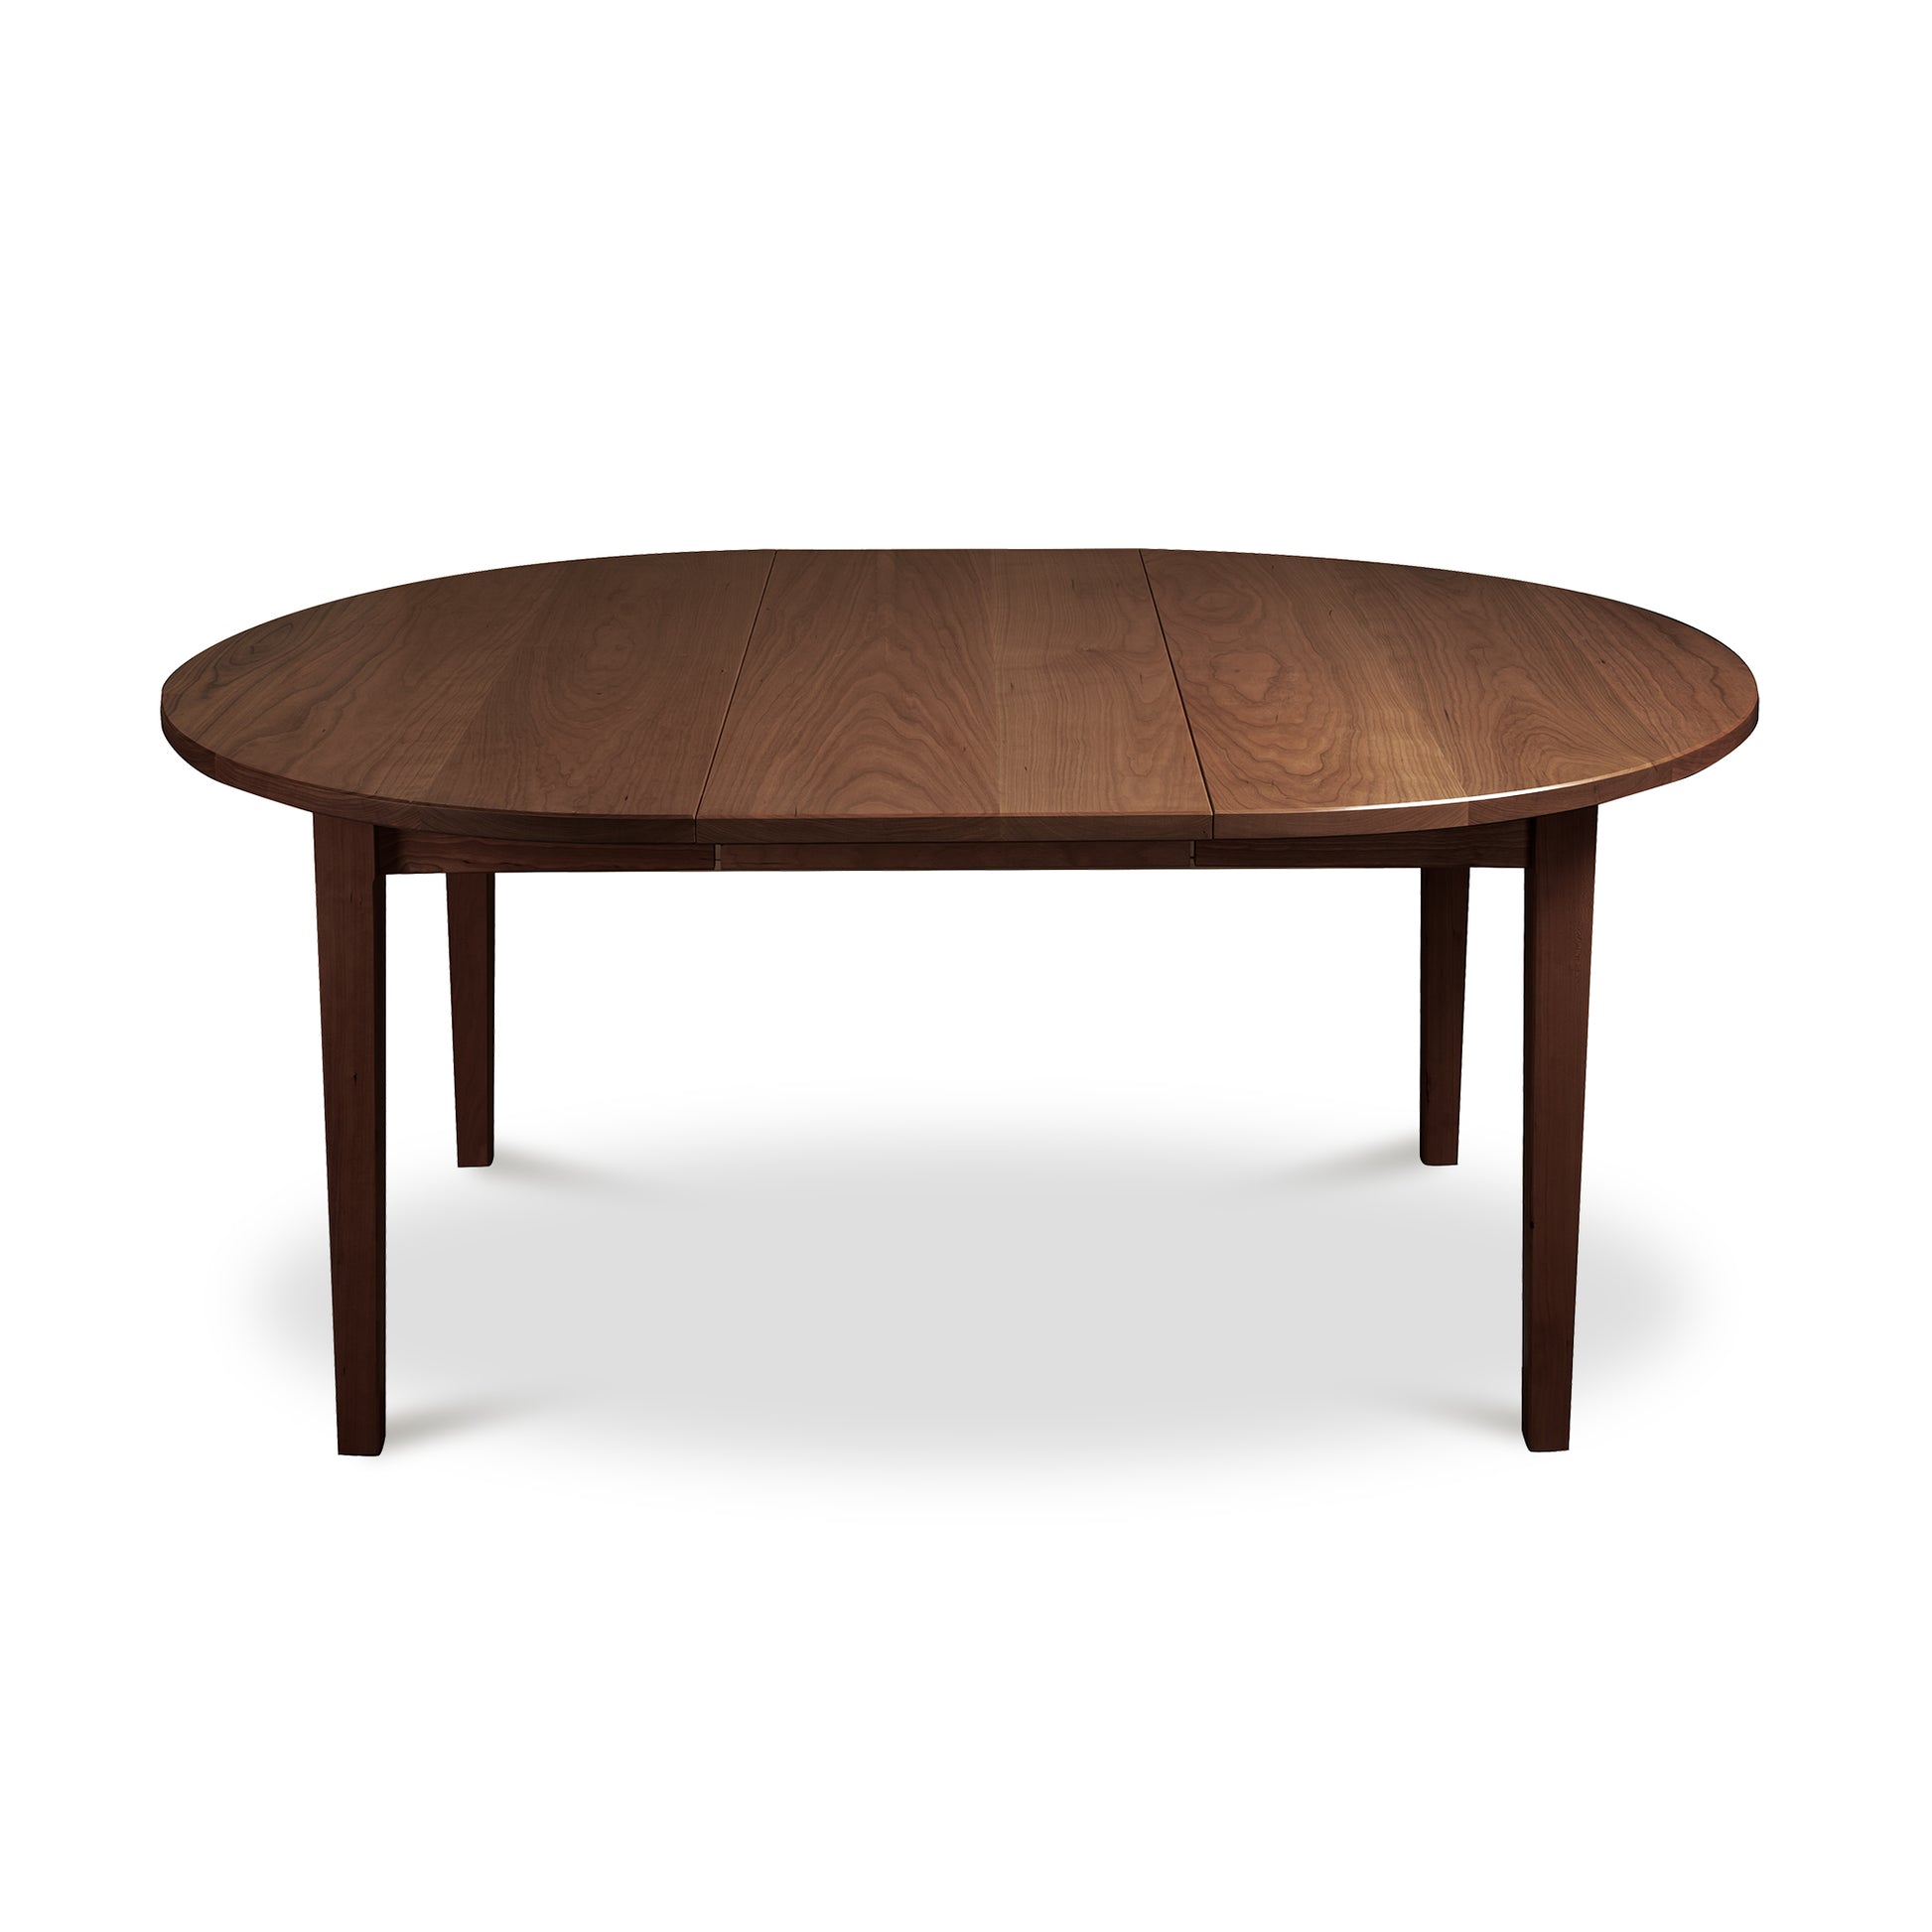 A Vermont Shaker Round Extension Table, handcrafted by Maple Corner Woodworks in Vermont, with a smooth finish and four legs, isolated against a white background.